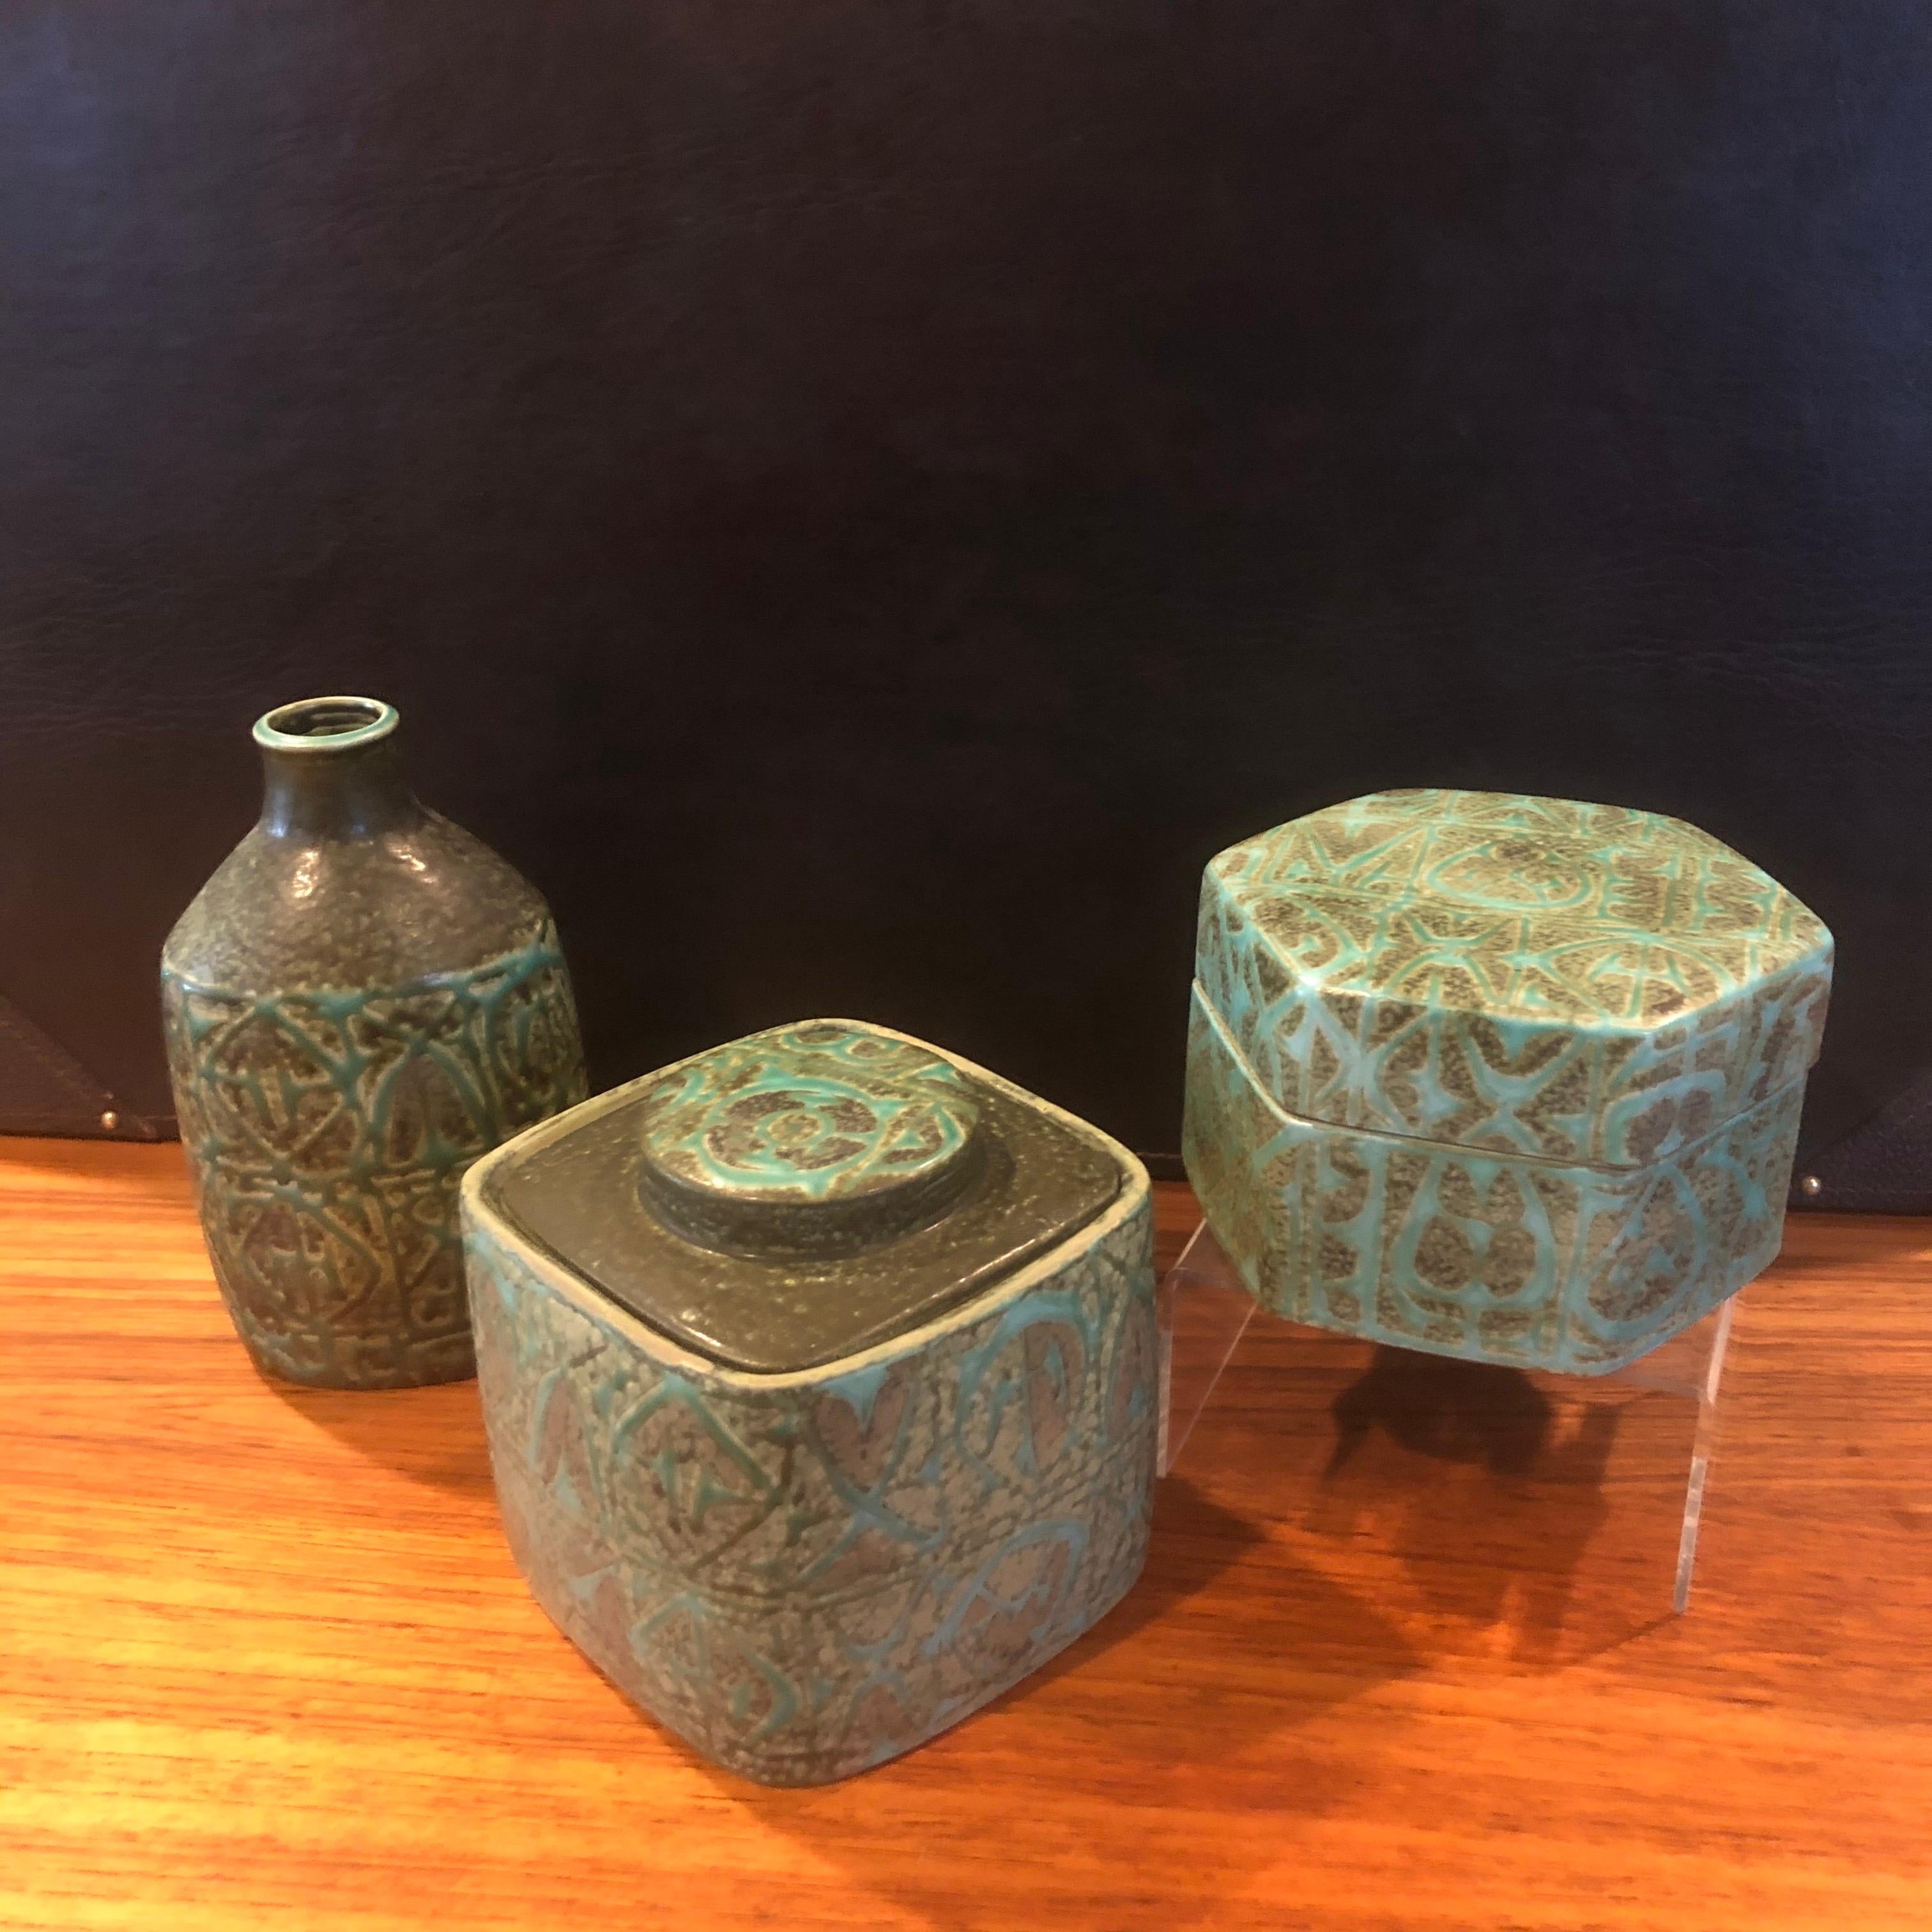 Wonderful Fajance three-piece vase, lidded hexagon box & humidor set from the Baca line by Nils Thorsson for Royal Copenhagen, circa 1960s. The green and grey glazed stoneware containers with geometric abstract design was designed by Royal